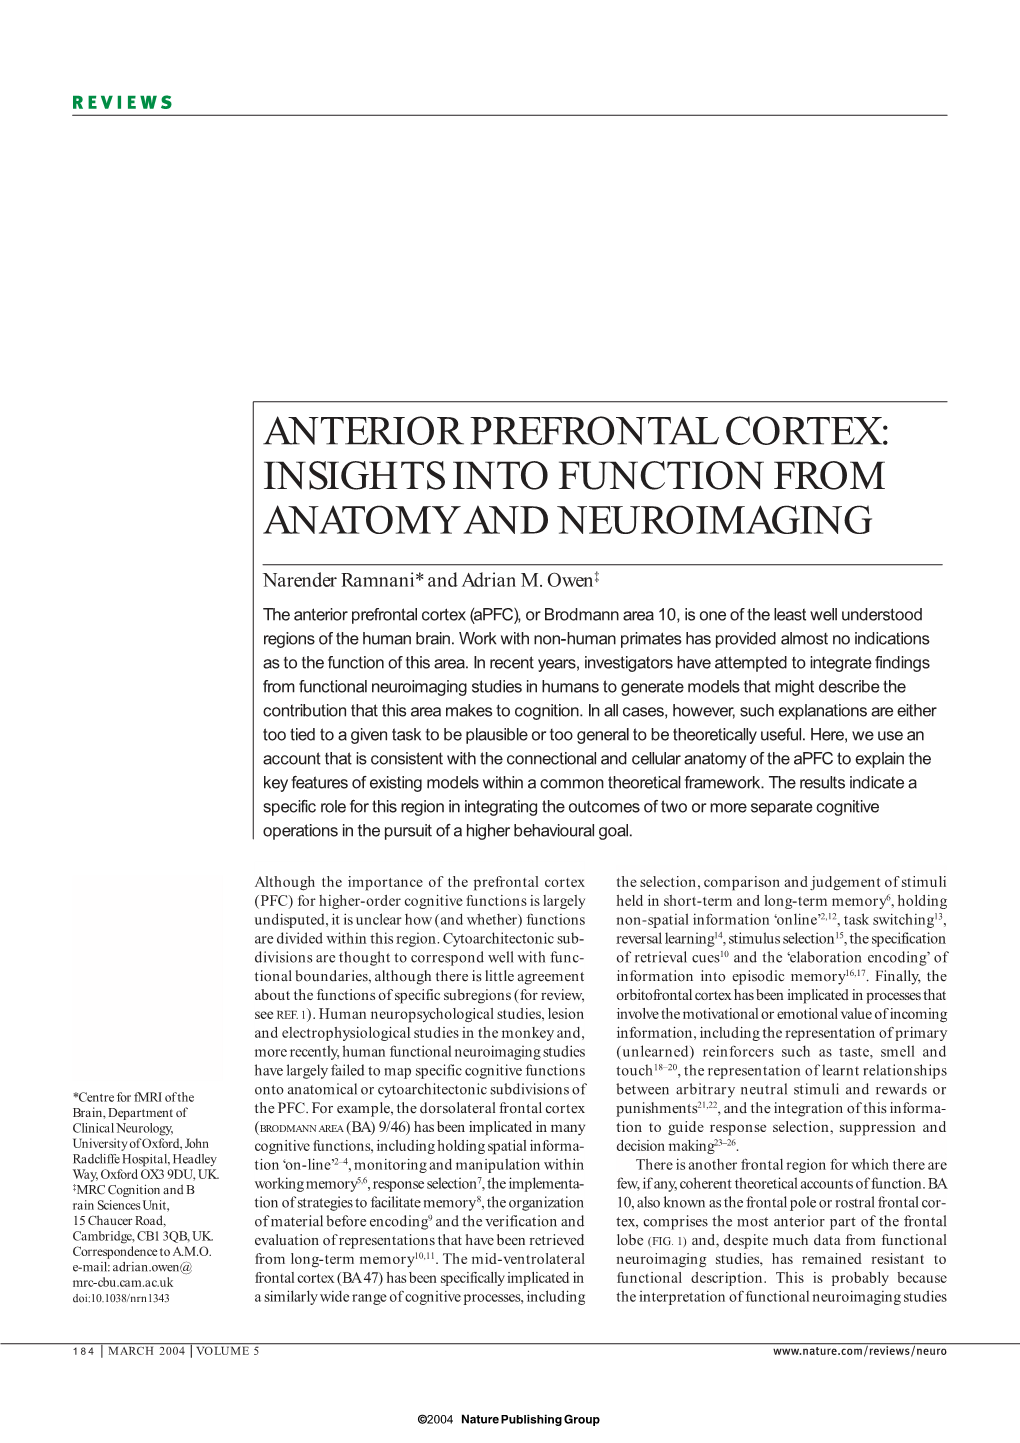 Anterior Prefrontal Cortex: Insights Into Function from Anatomy and Neuroimaging